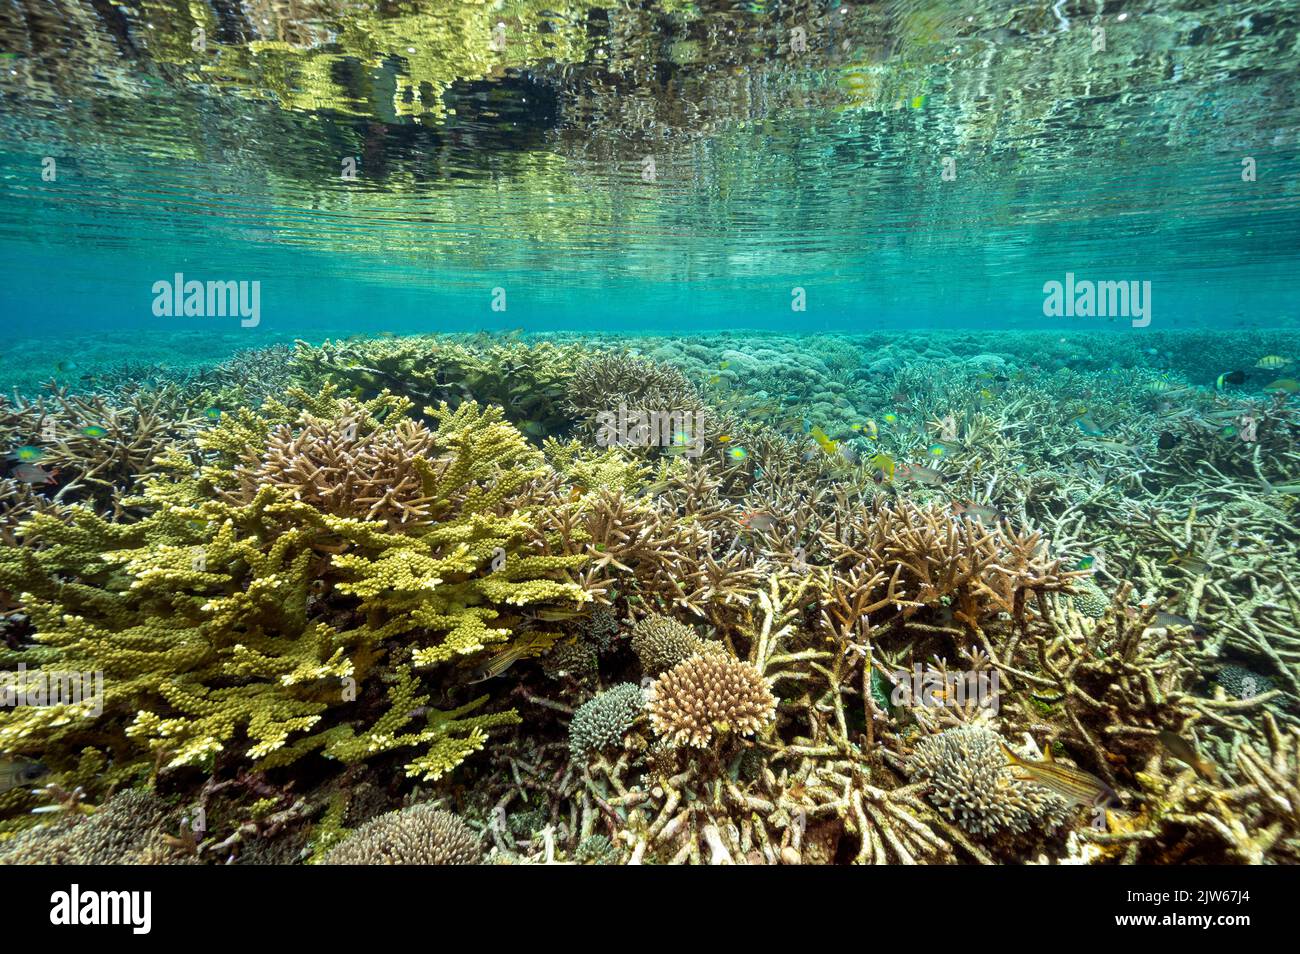 Reef scenic with pristine staghorn corals Raja Ampat Indonesia. Stock Photo